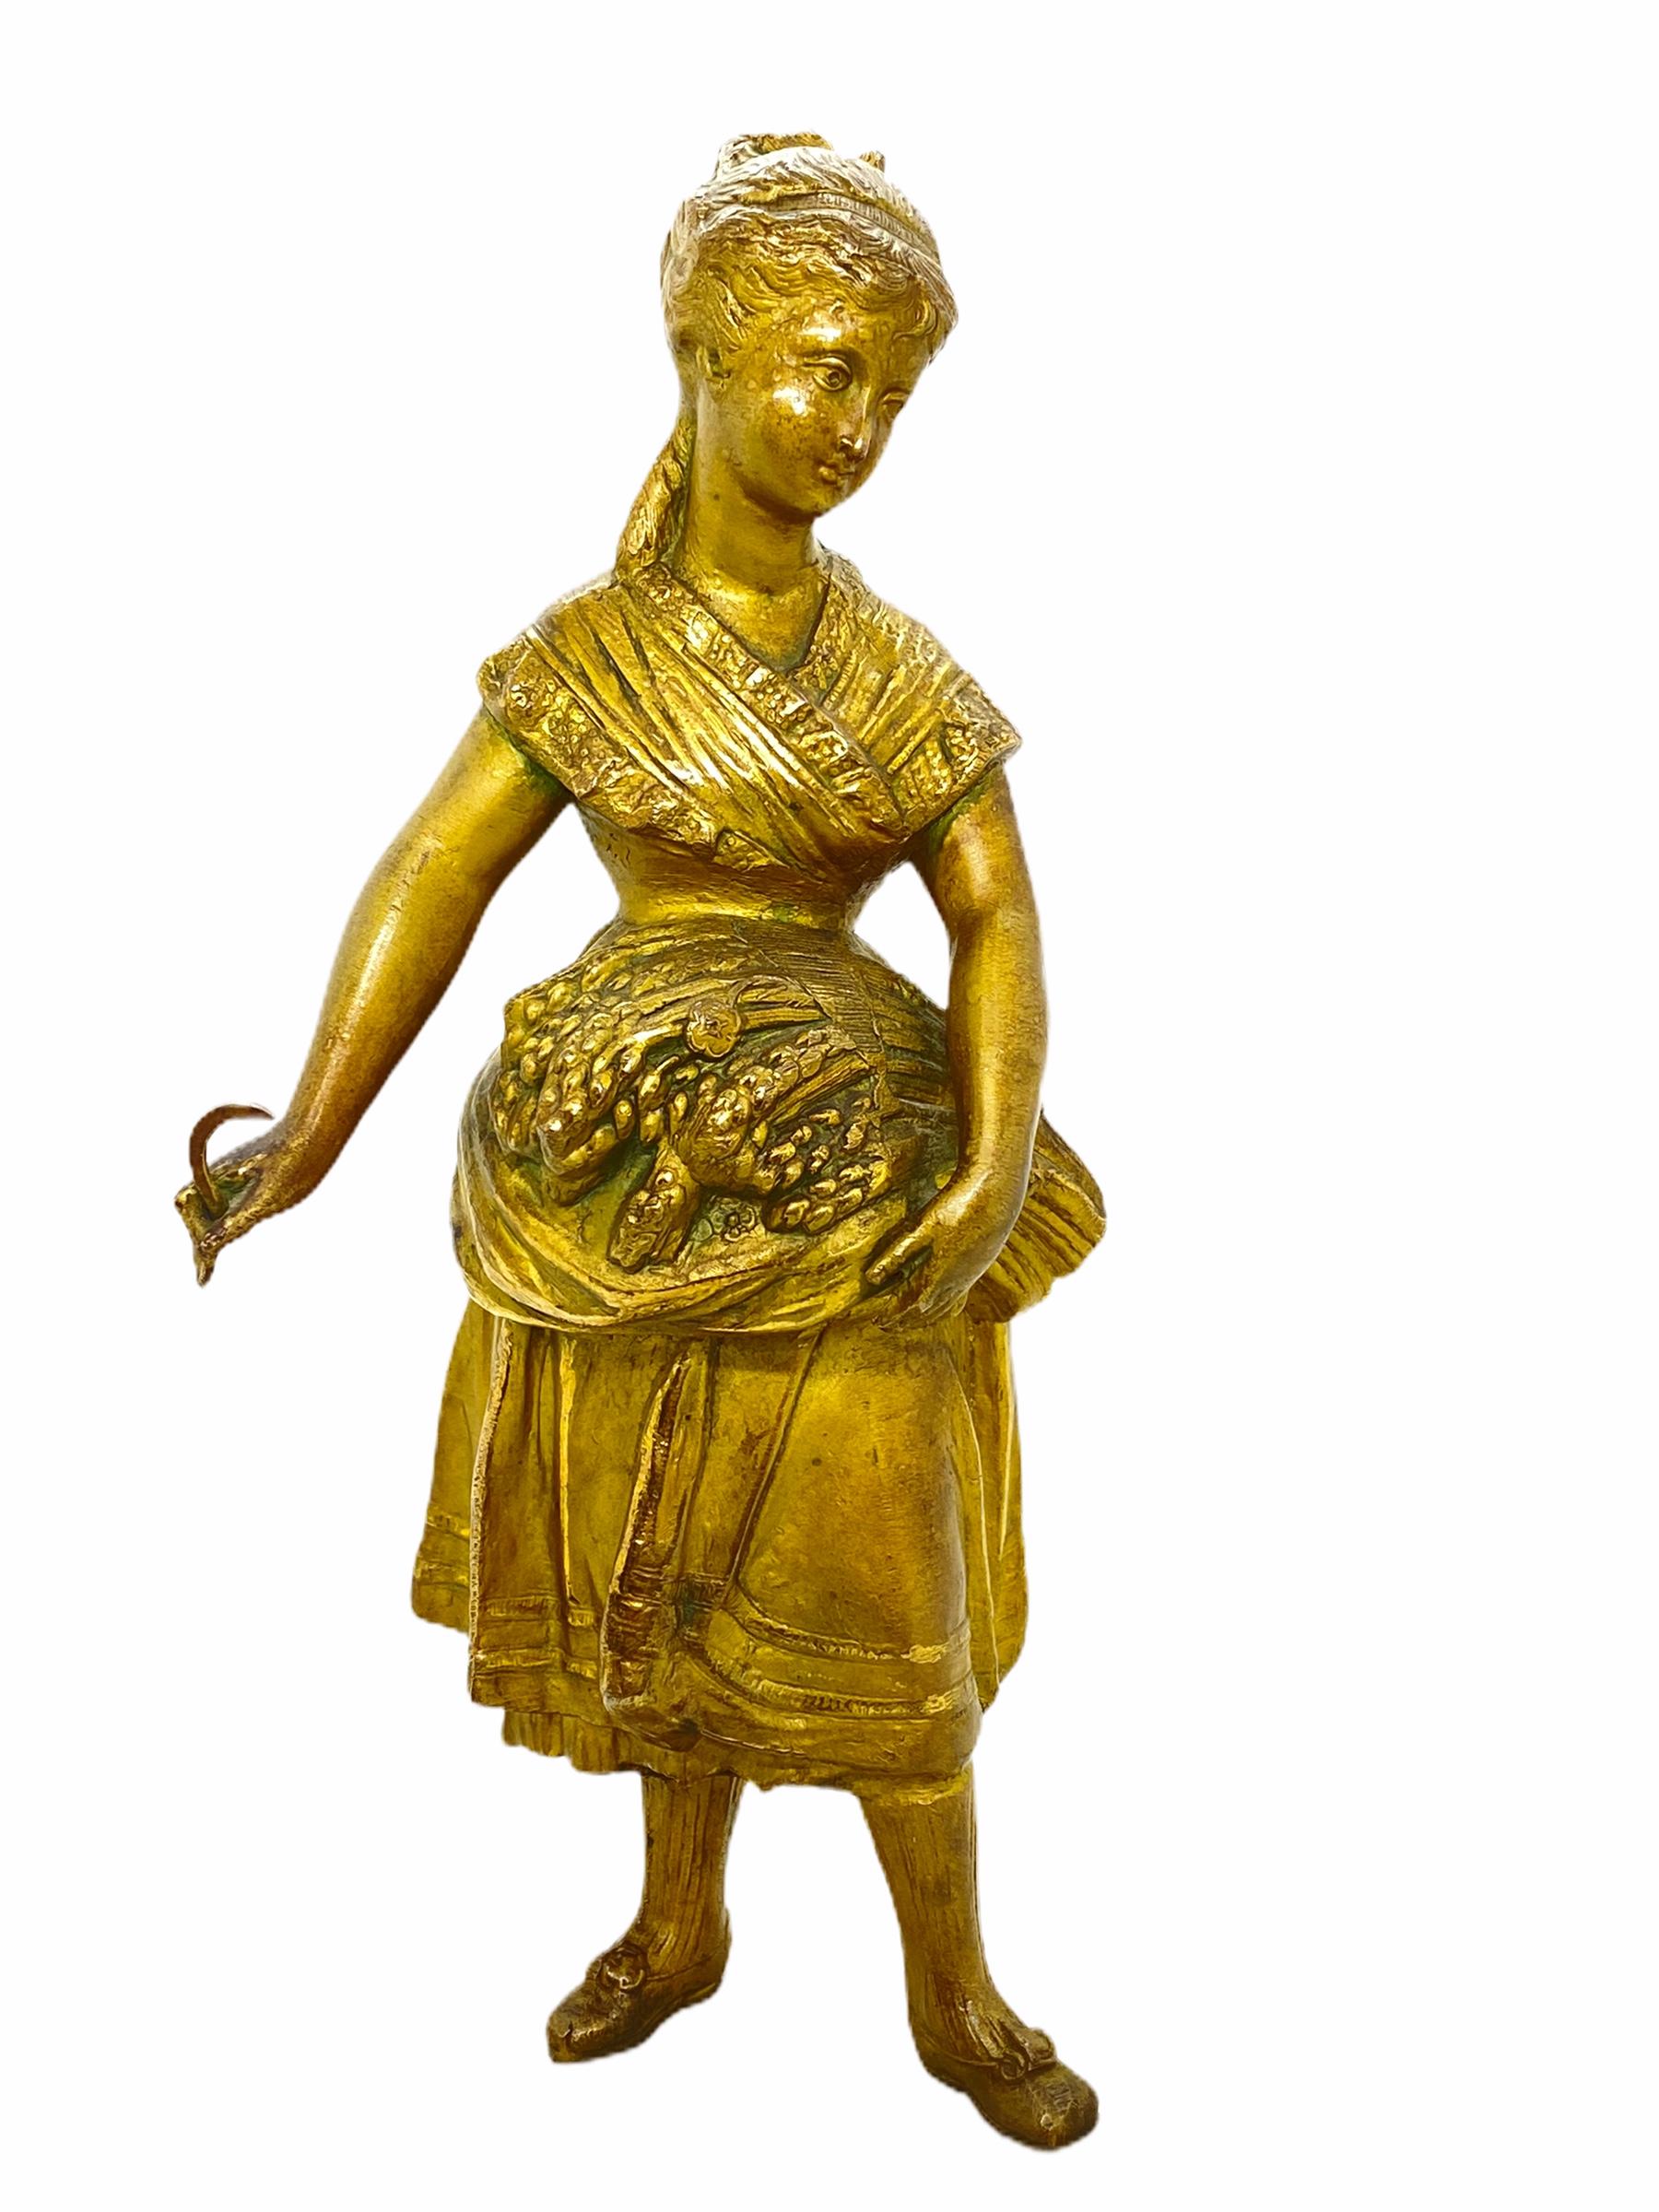 A decorative maid sculpture. Some wear with a nice patina, but this is old-age. Made of metal and a marble base. This makes a nice addition to any room.